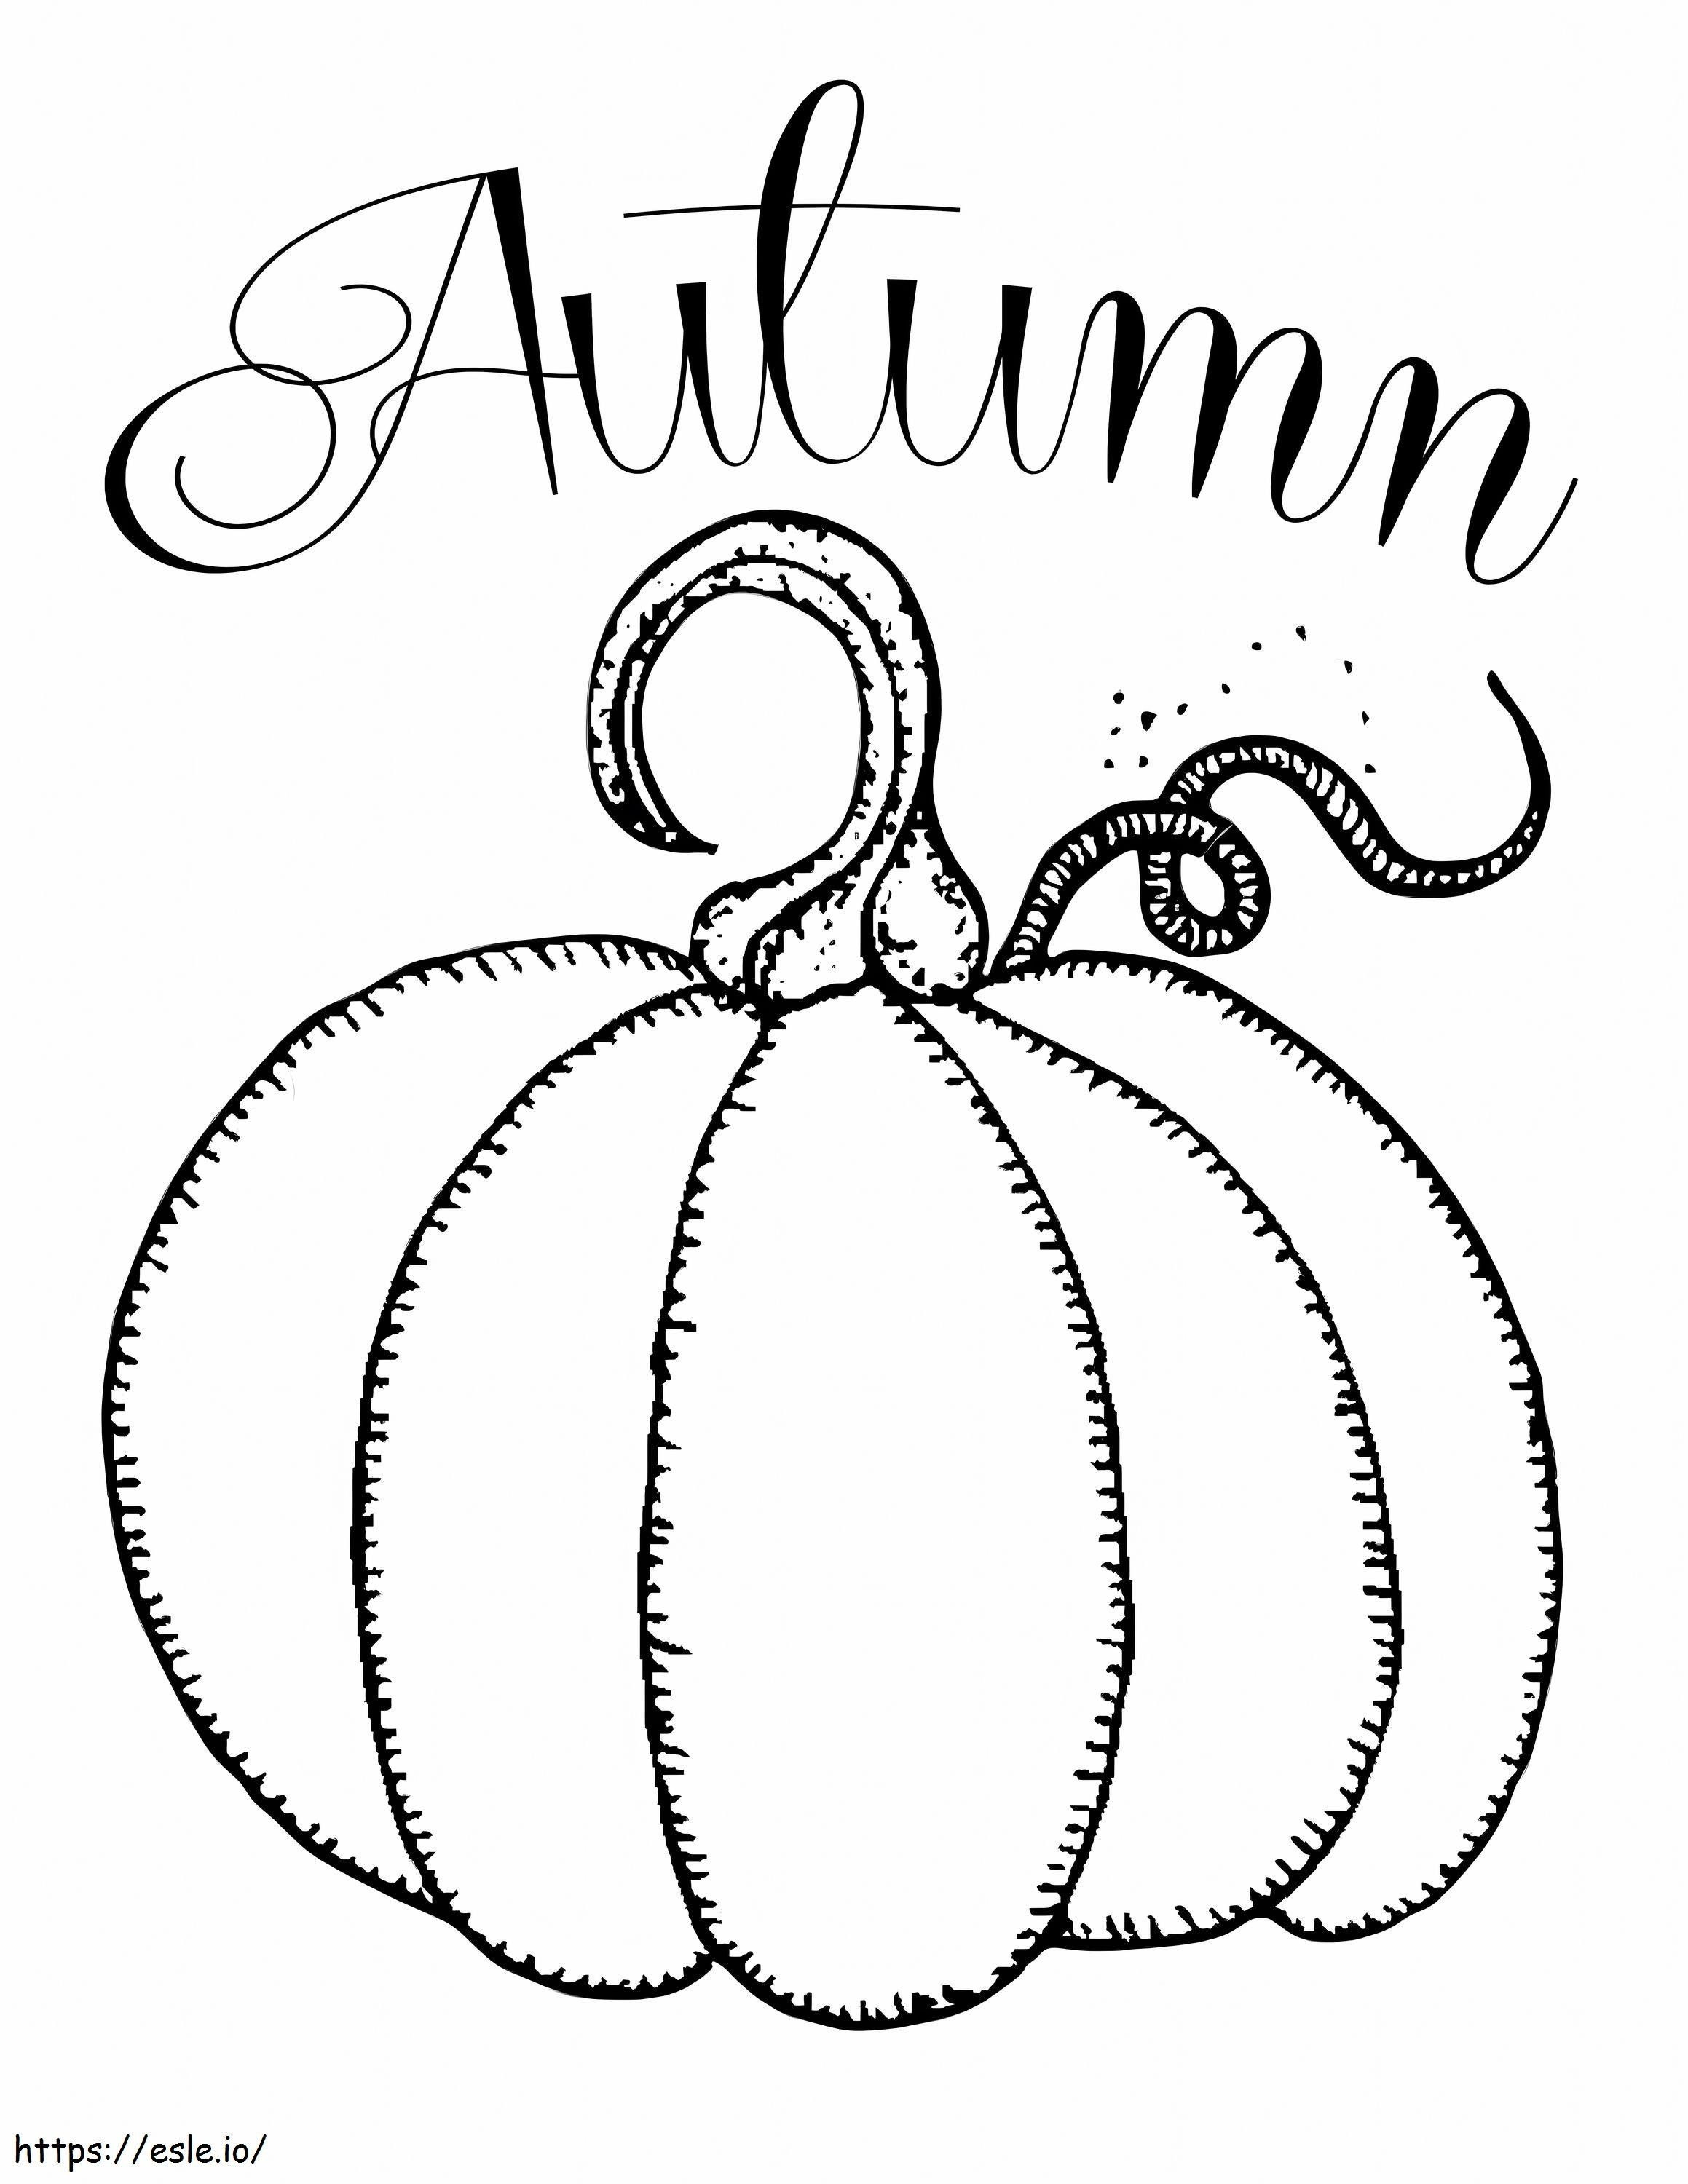 Pumpkin In Autumn coloring page